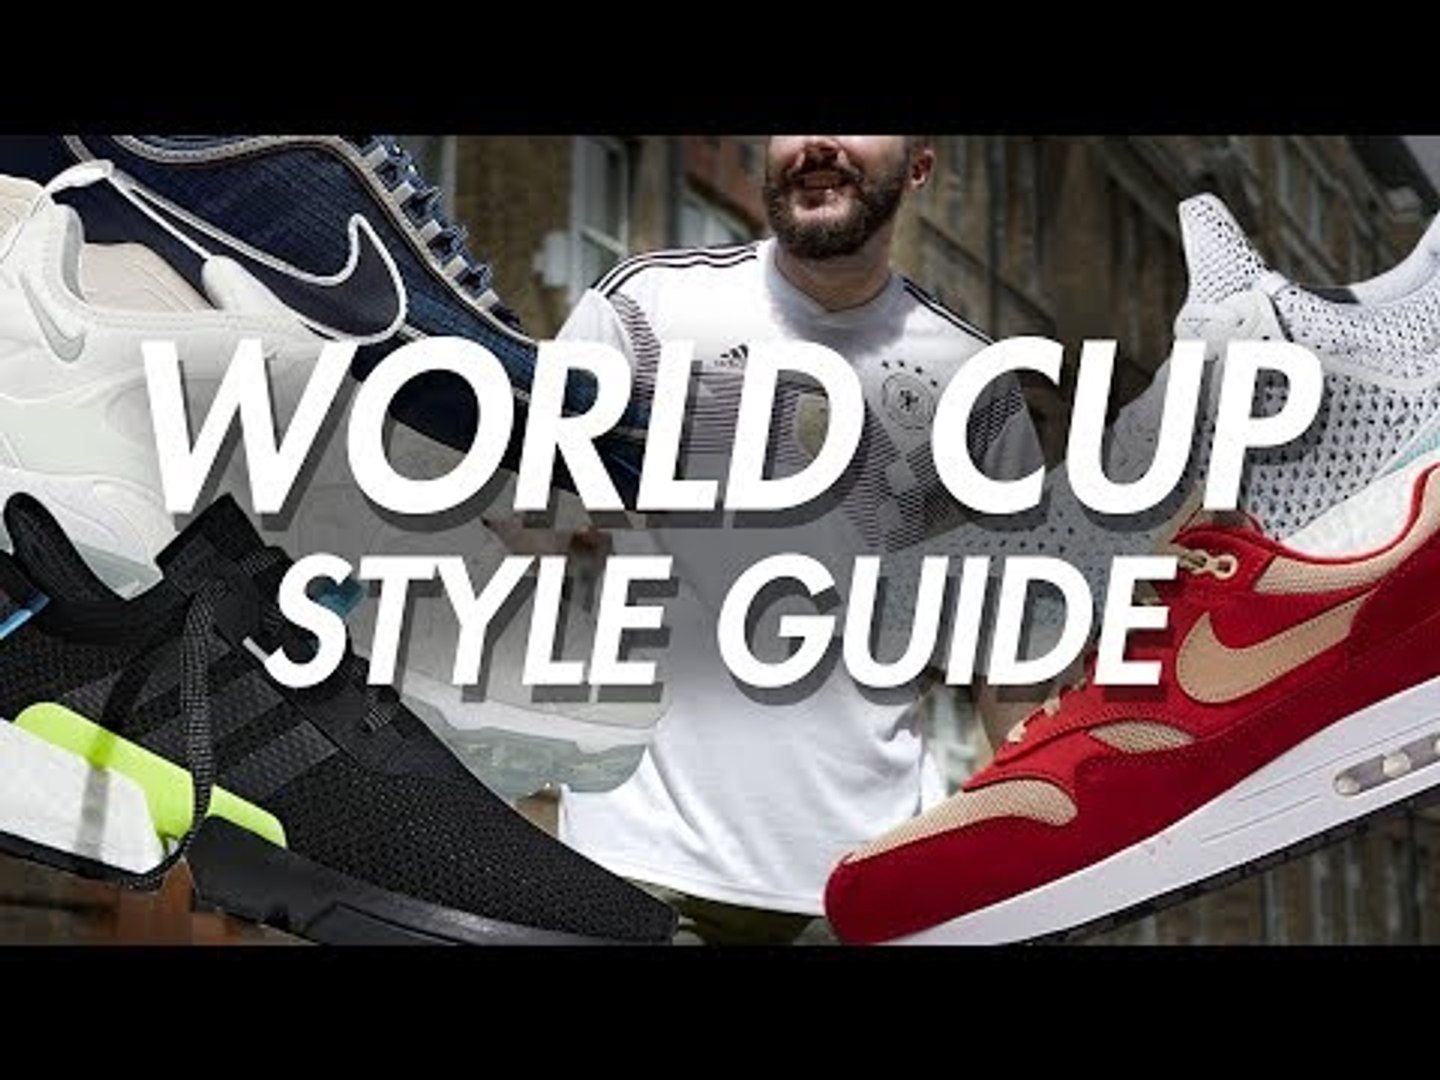 World Cup Style Guide | How to style your World Cup Kits feat. England, France, Germany & more.